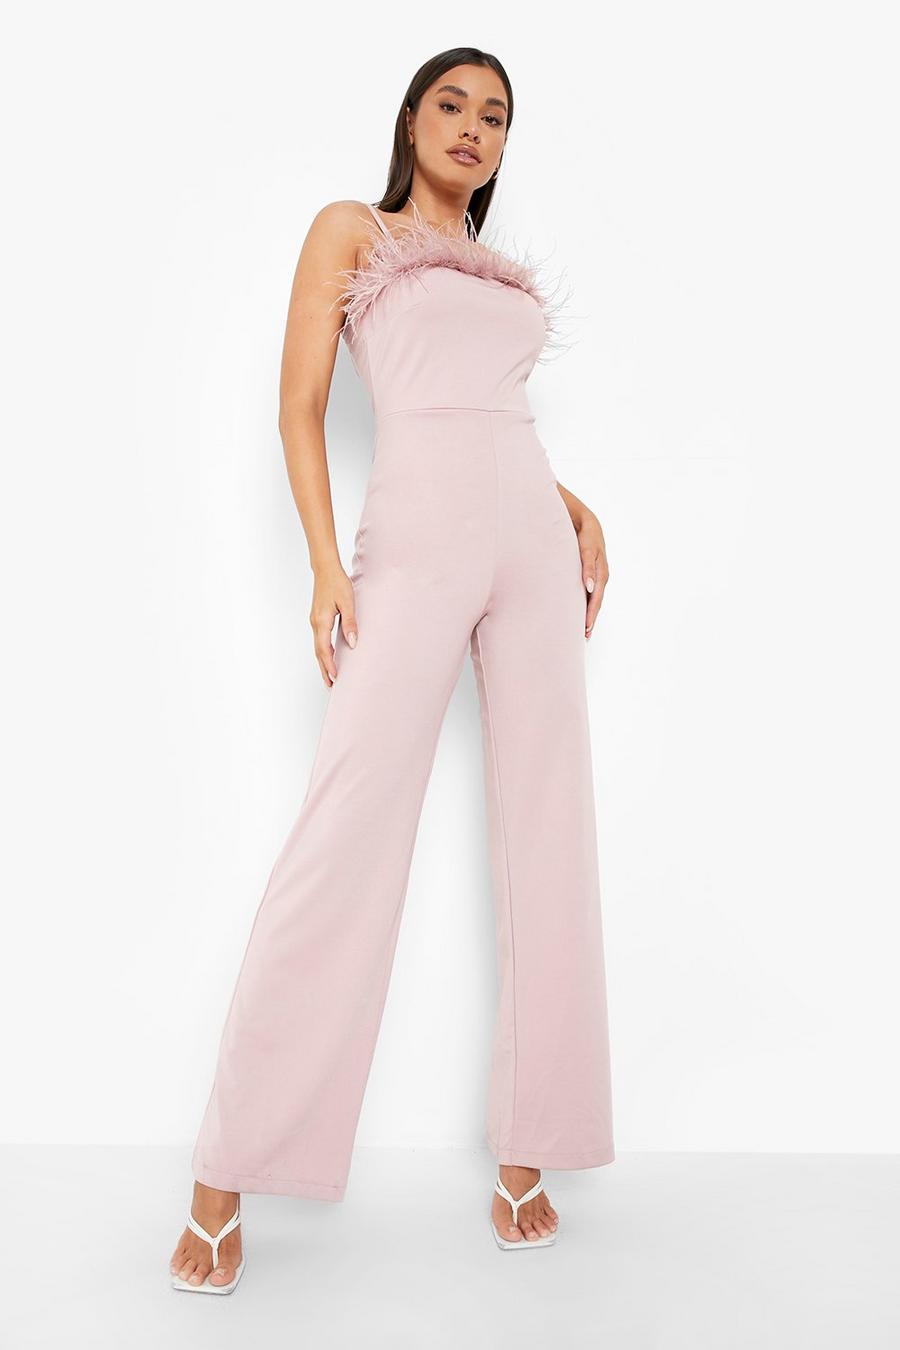 Soft pink rose Feather Strappy Wide Leg Jumpsuit